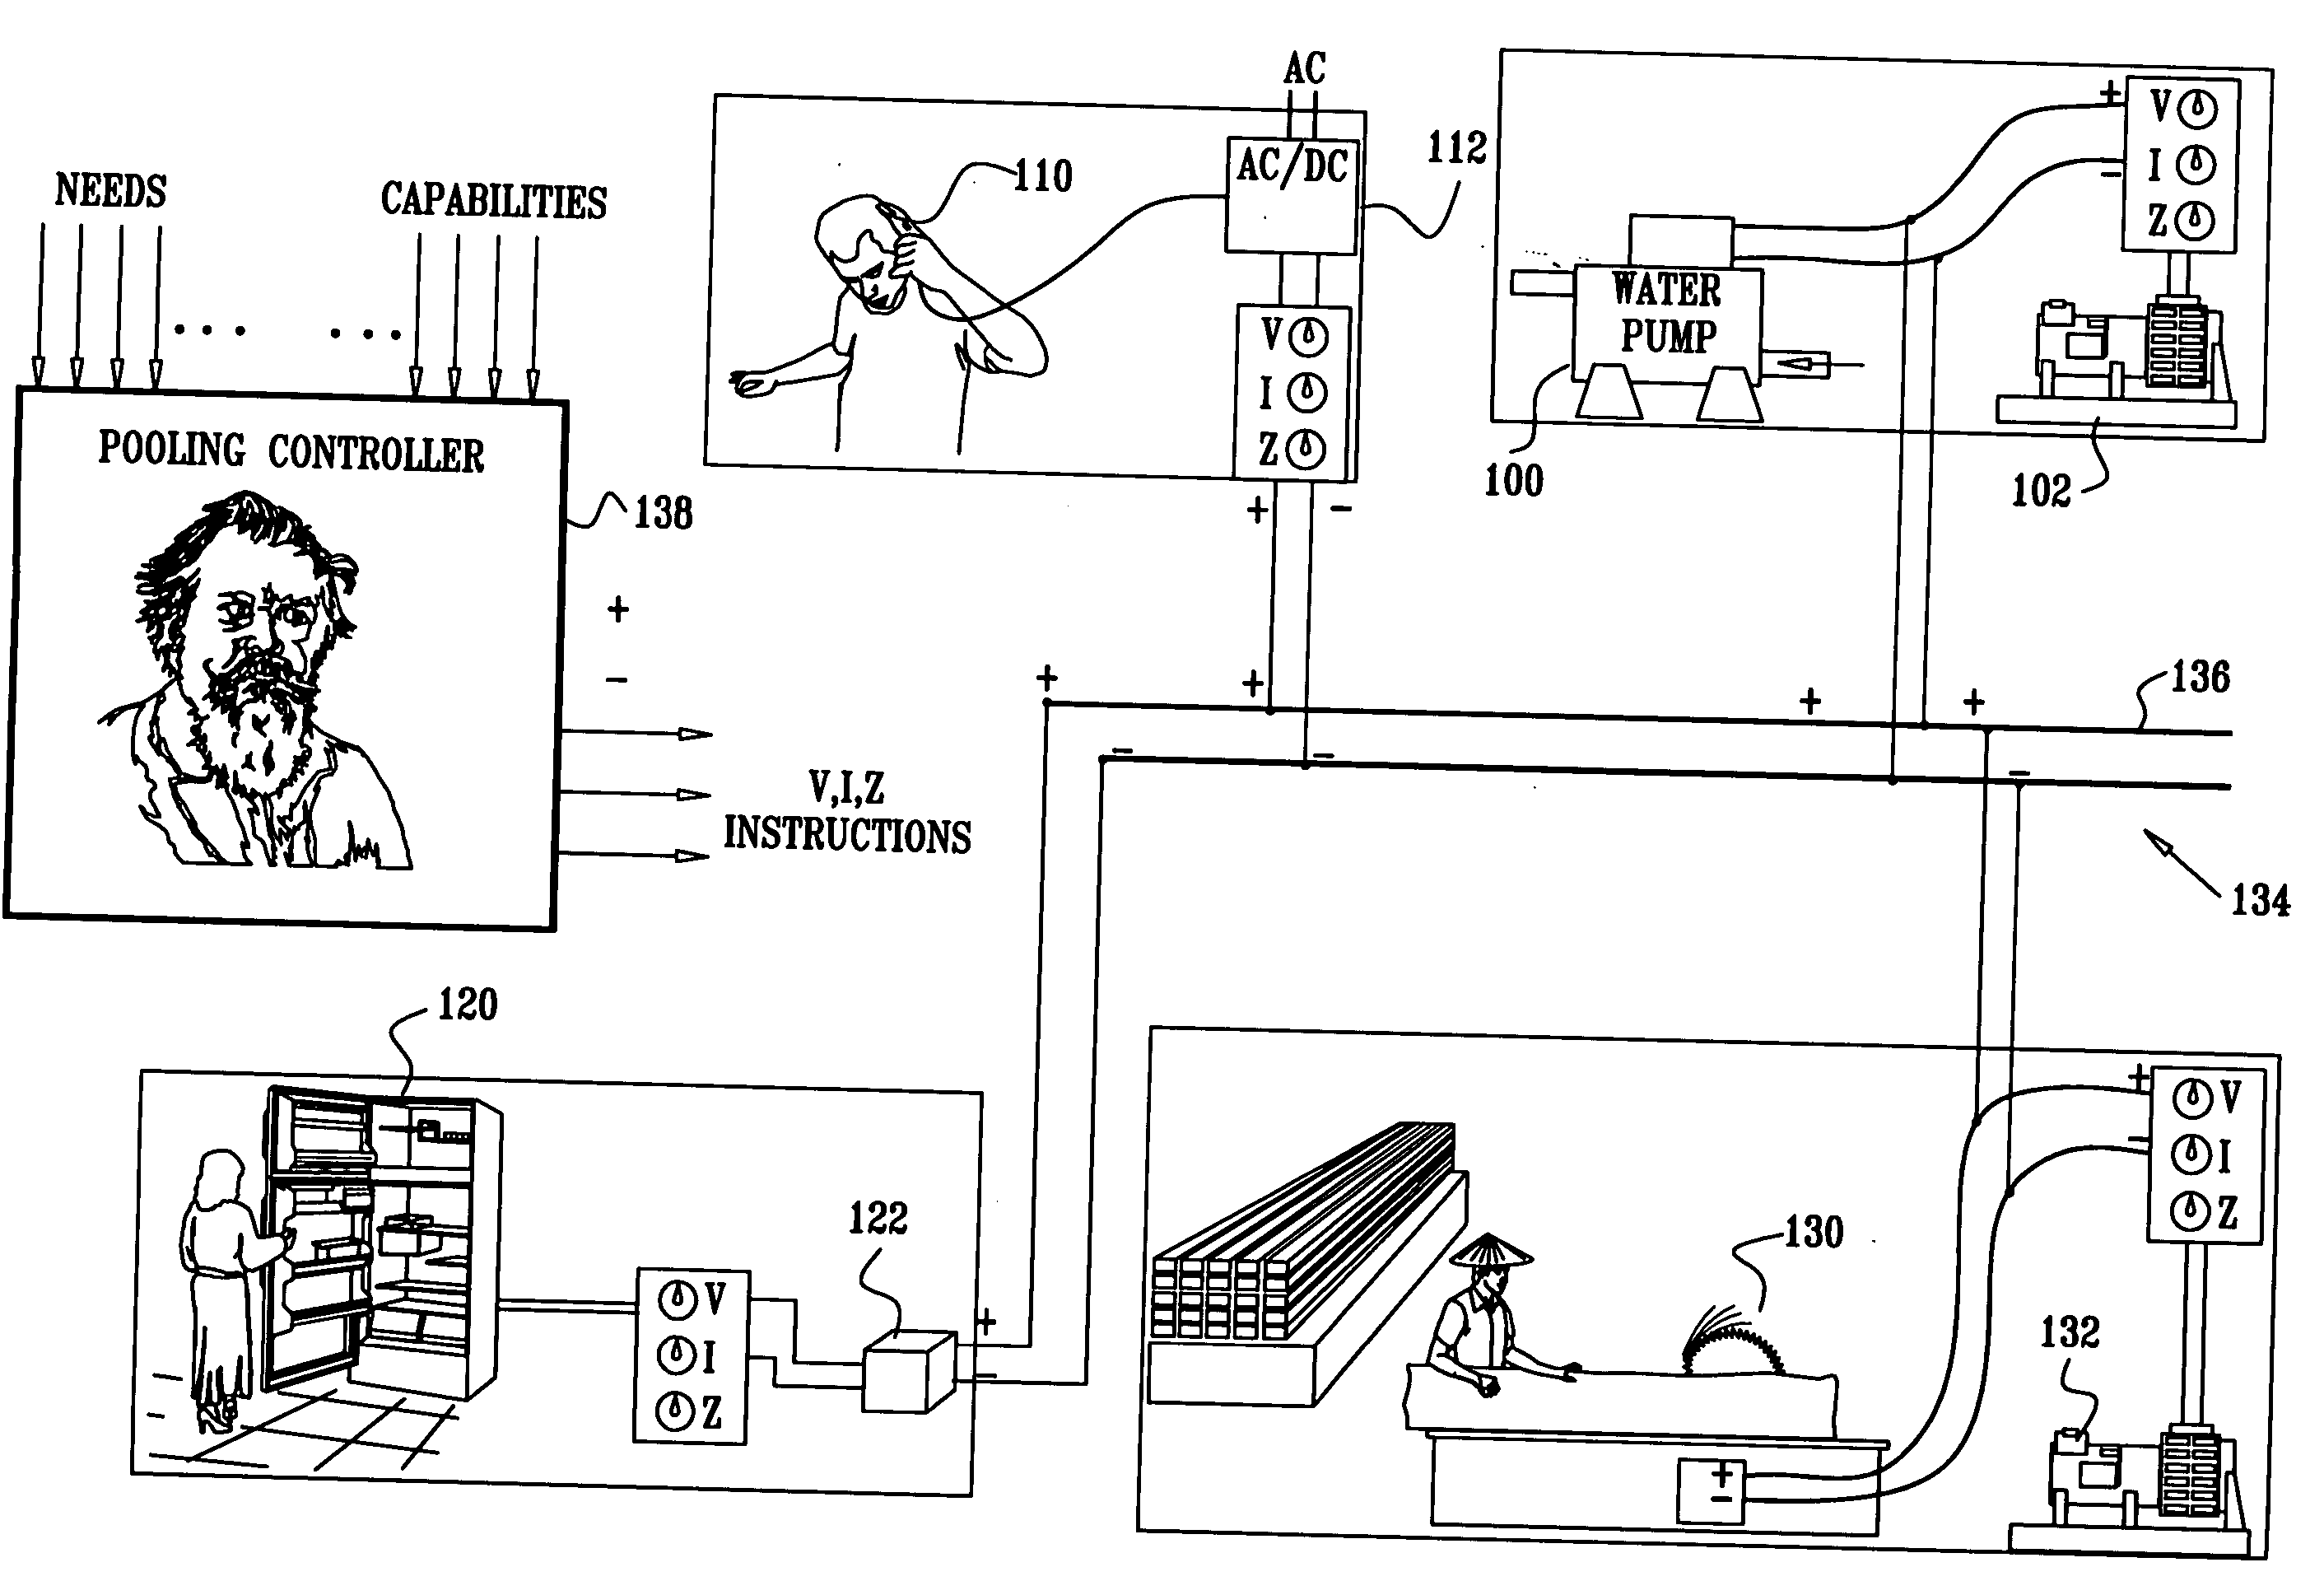 Power over ethernet switch node for use in power pooling